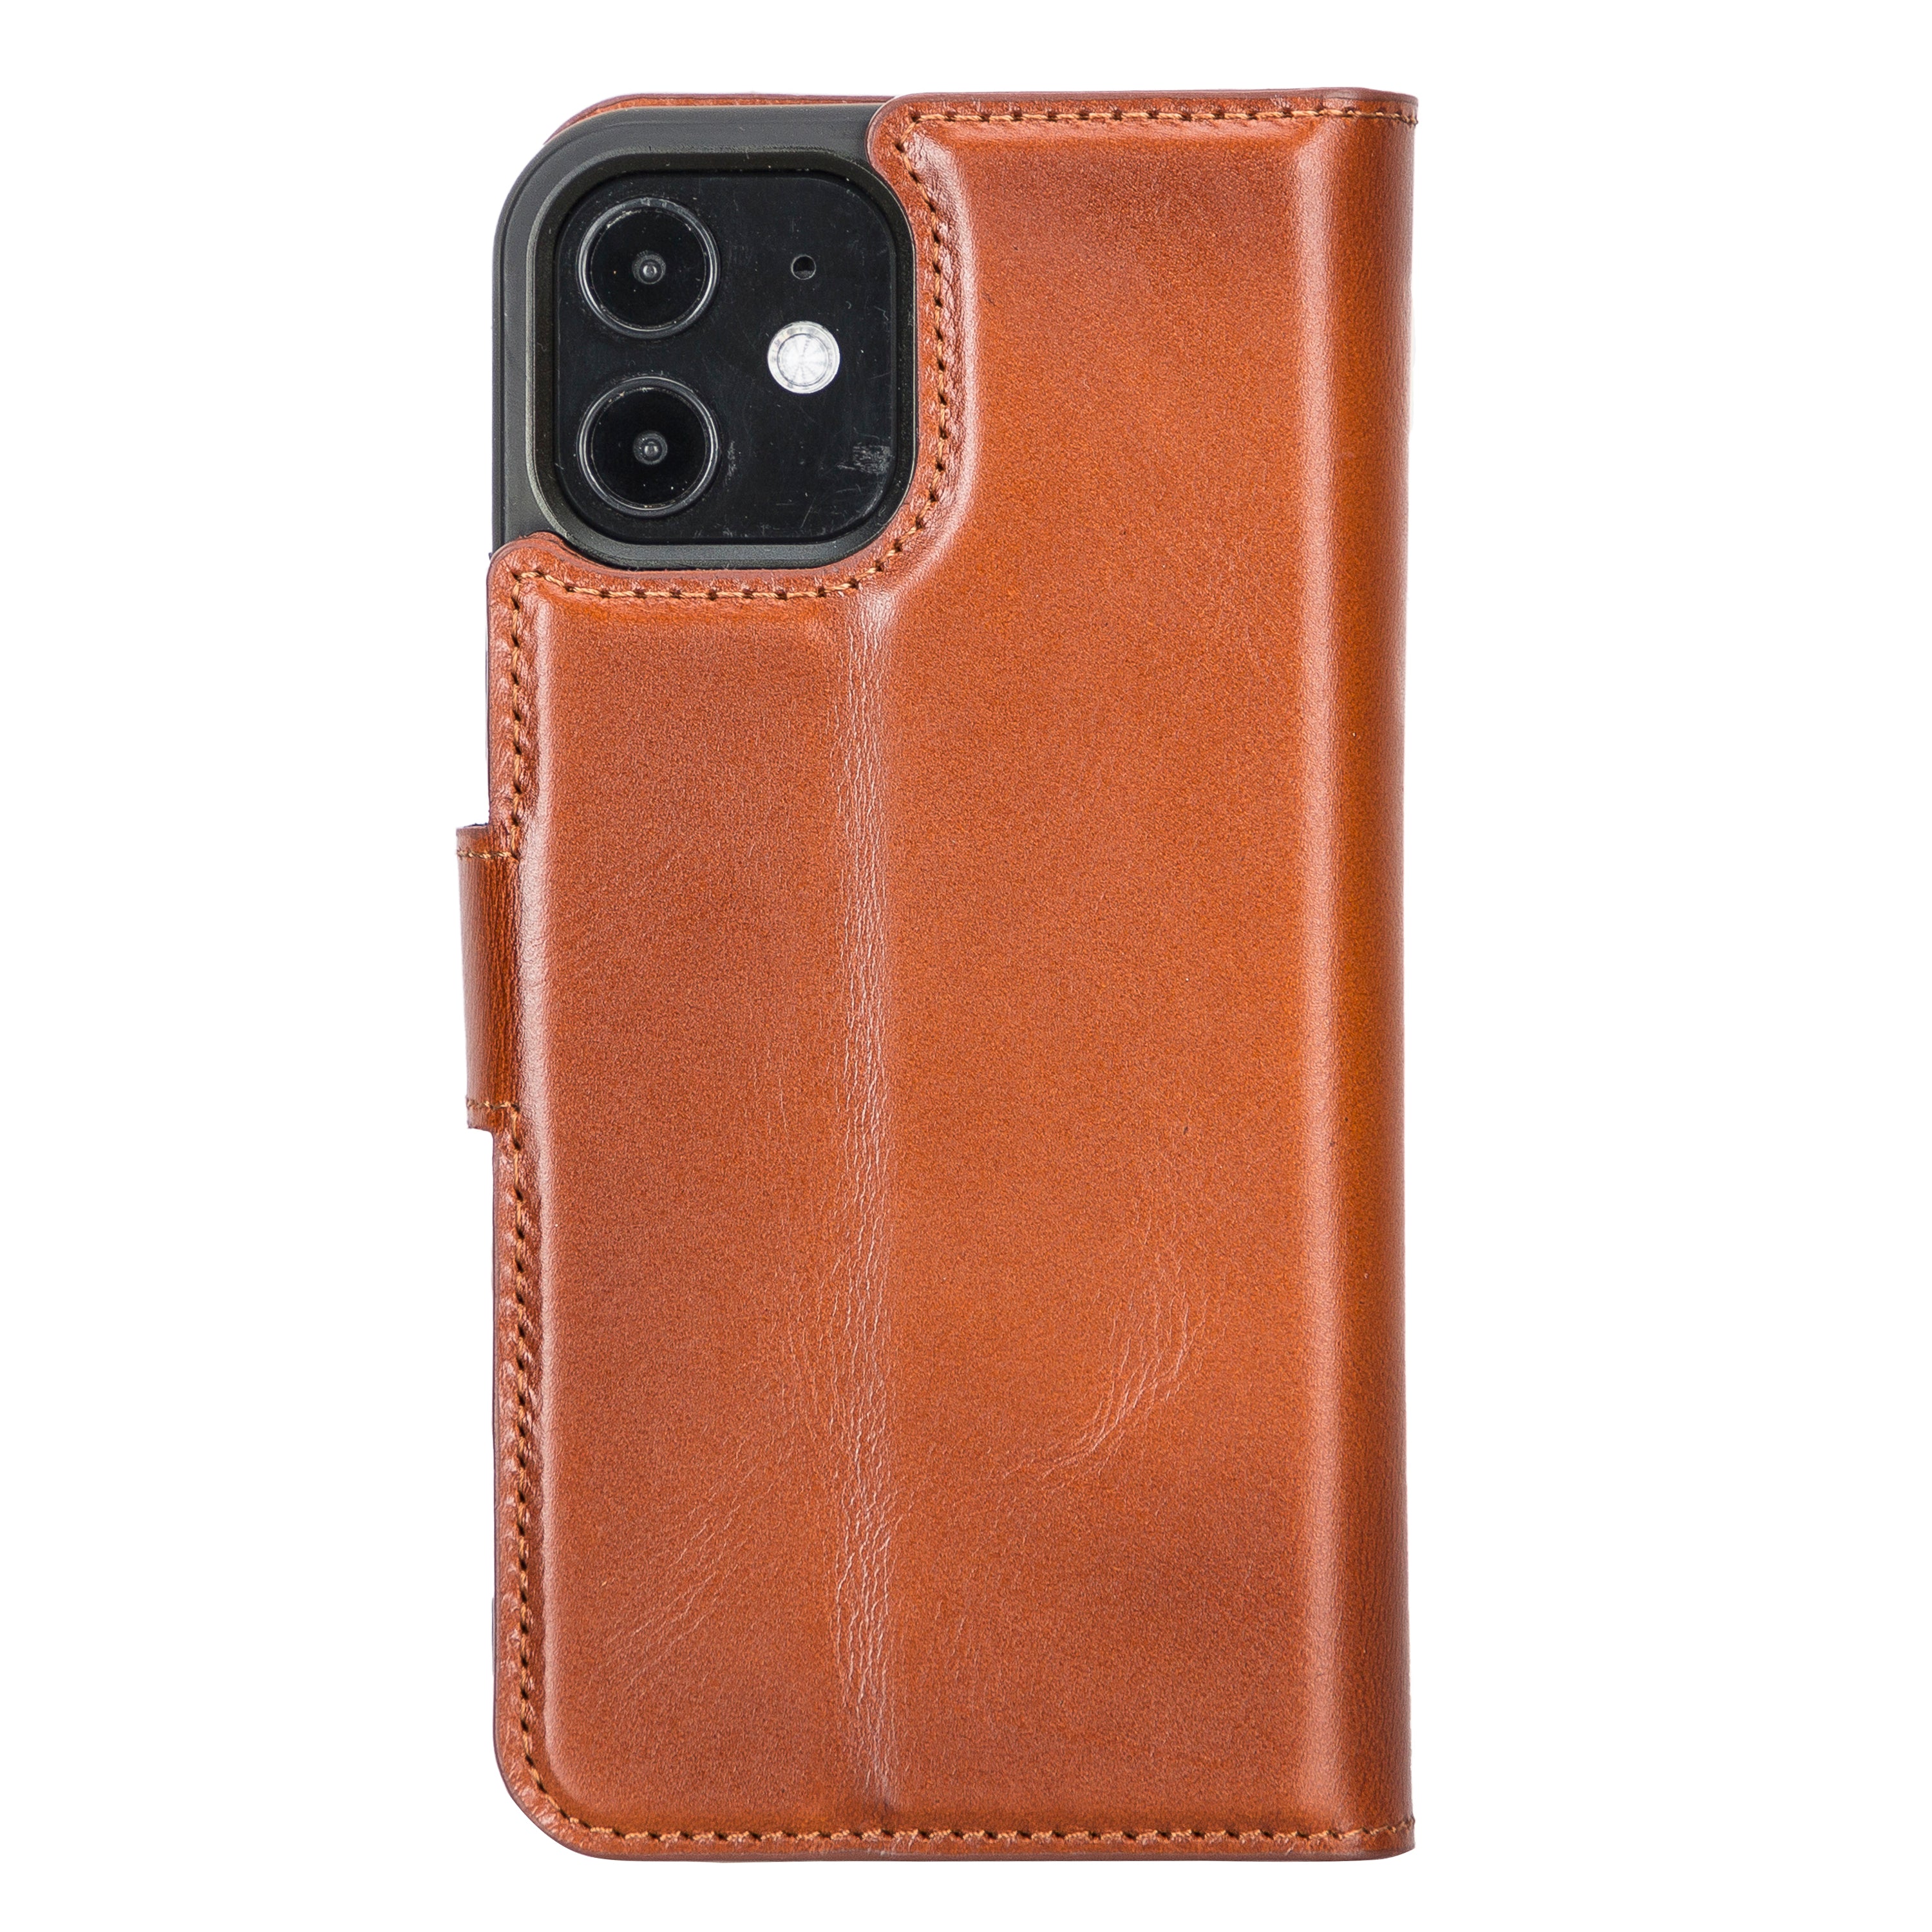 DelfiCase Magnetic Detachable Leather Wallet Case for iPhone 12 and iPhone 12 Pro (6.1") 4